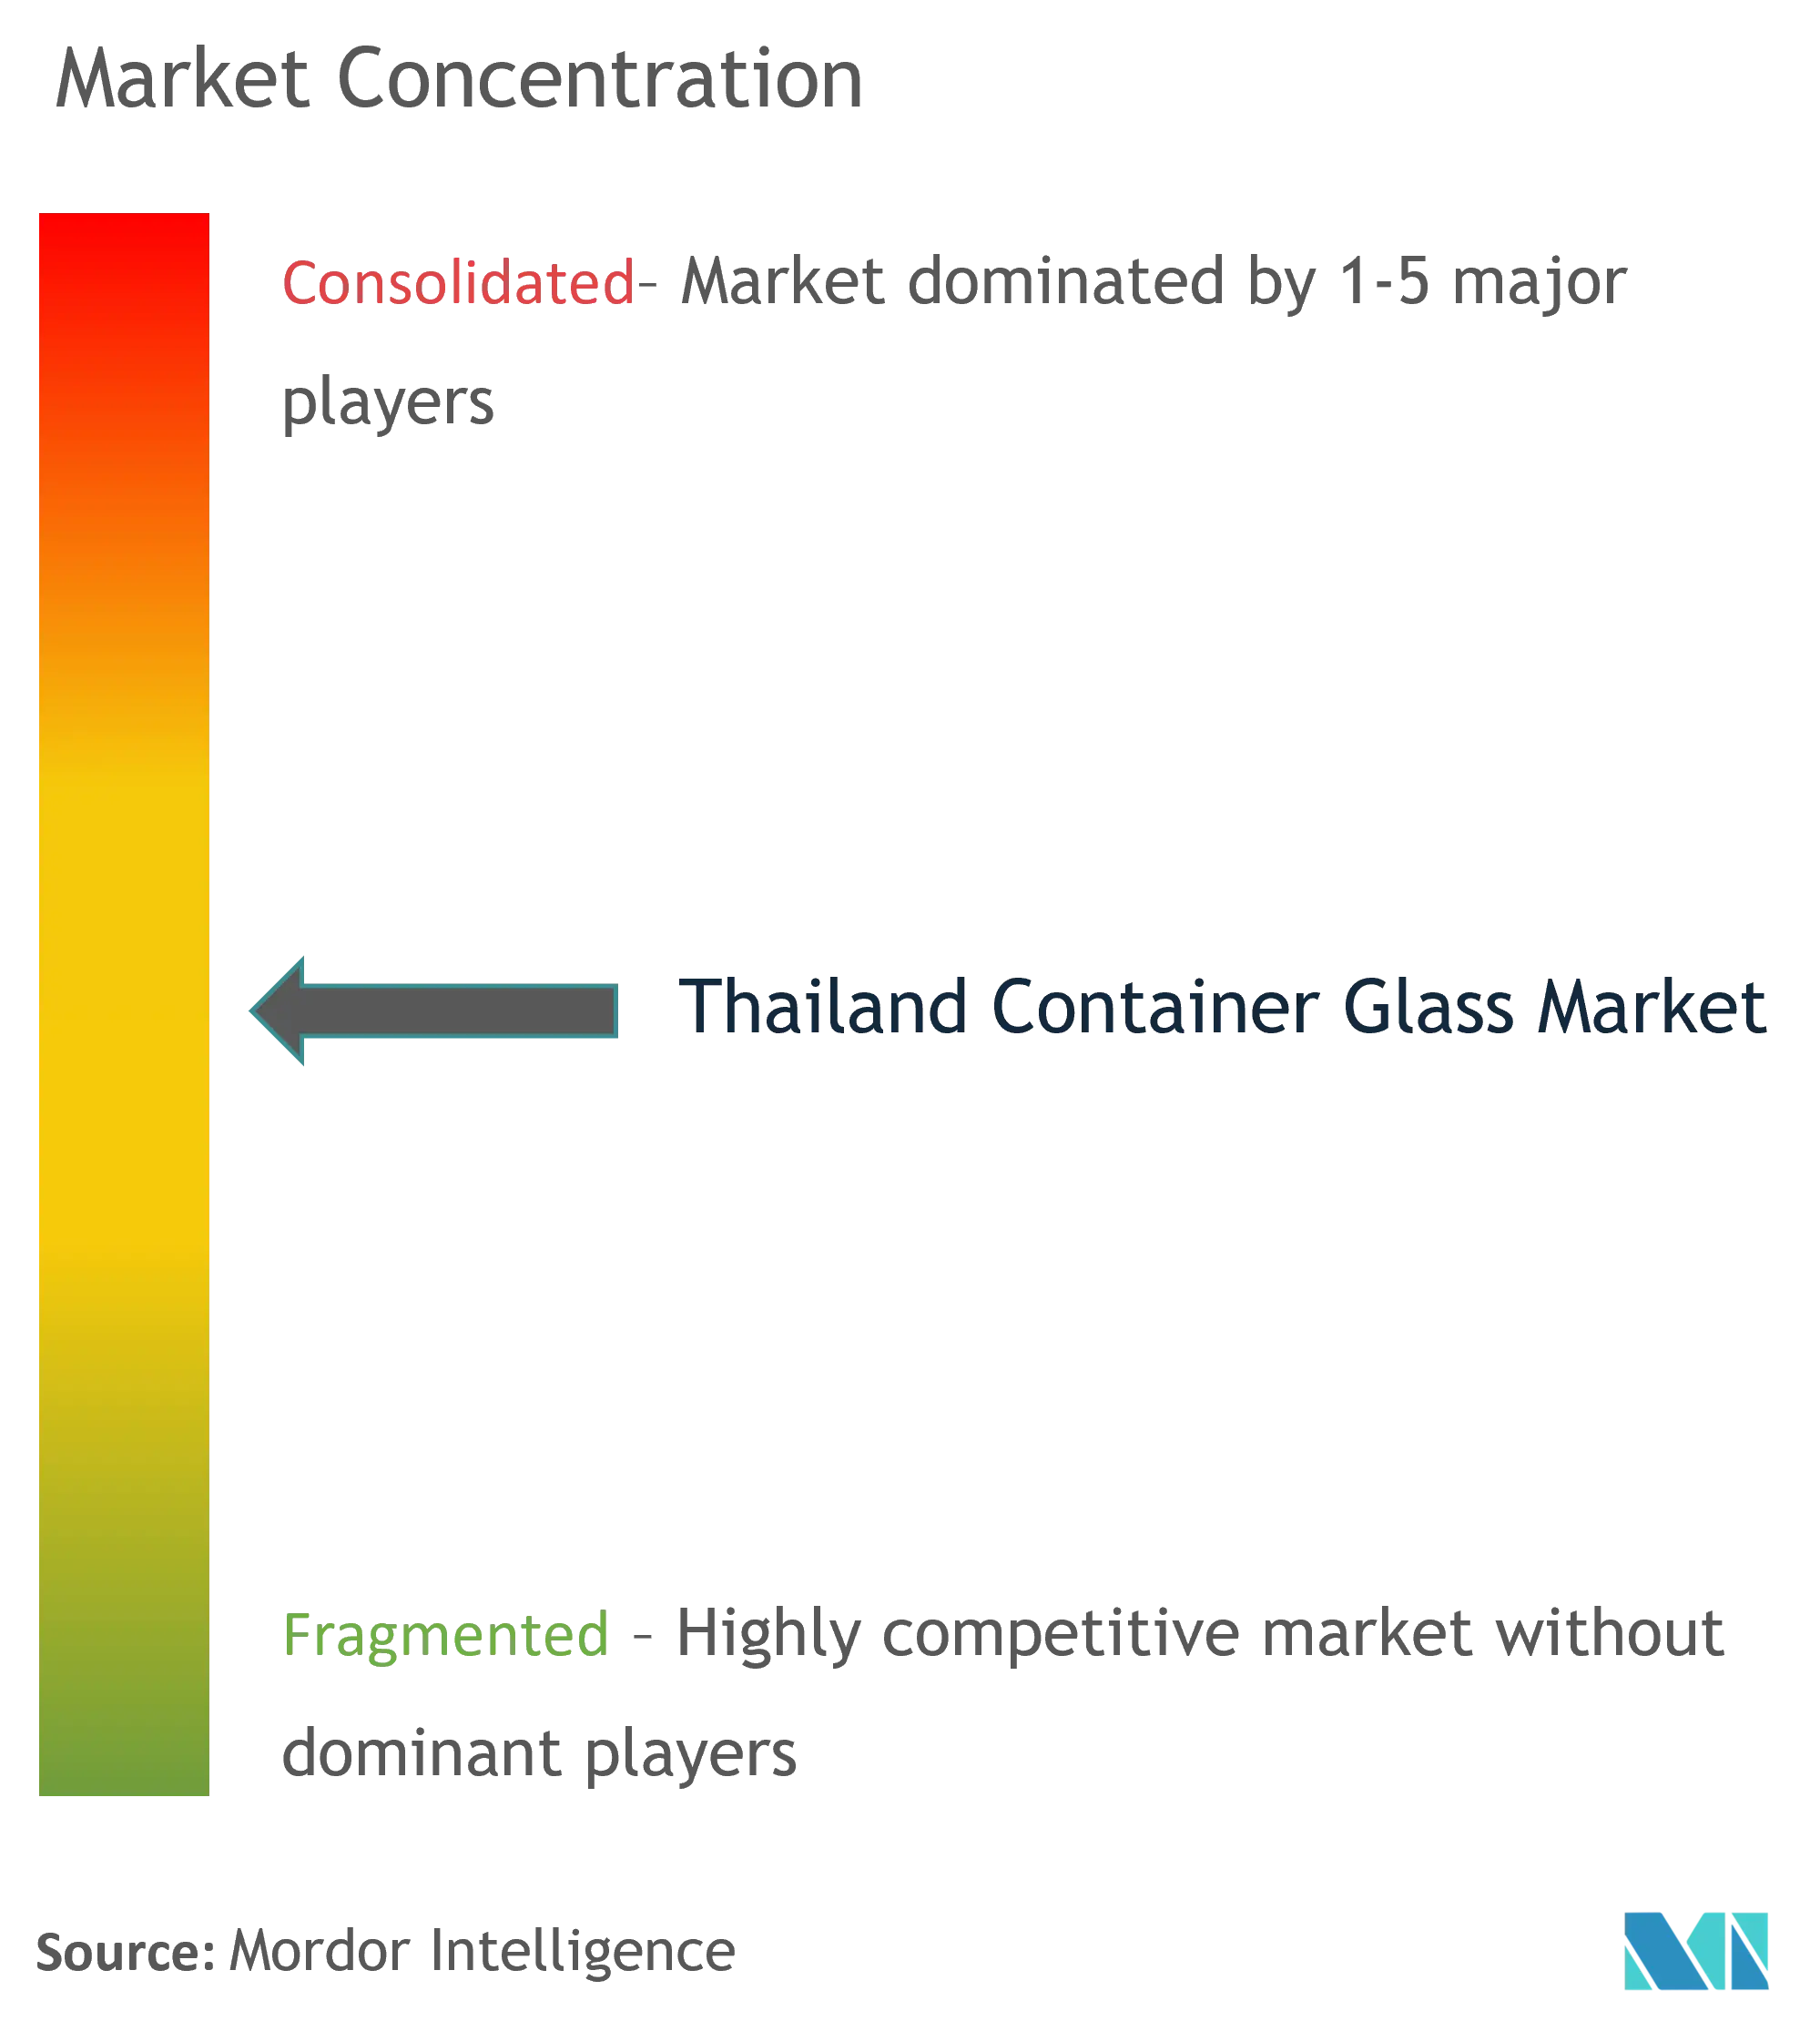 Thailand Container Glass Market - Market Concentration.png